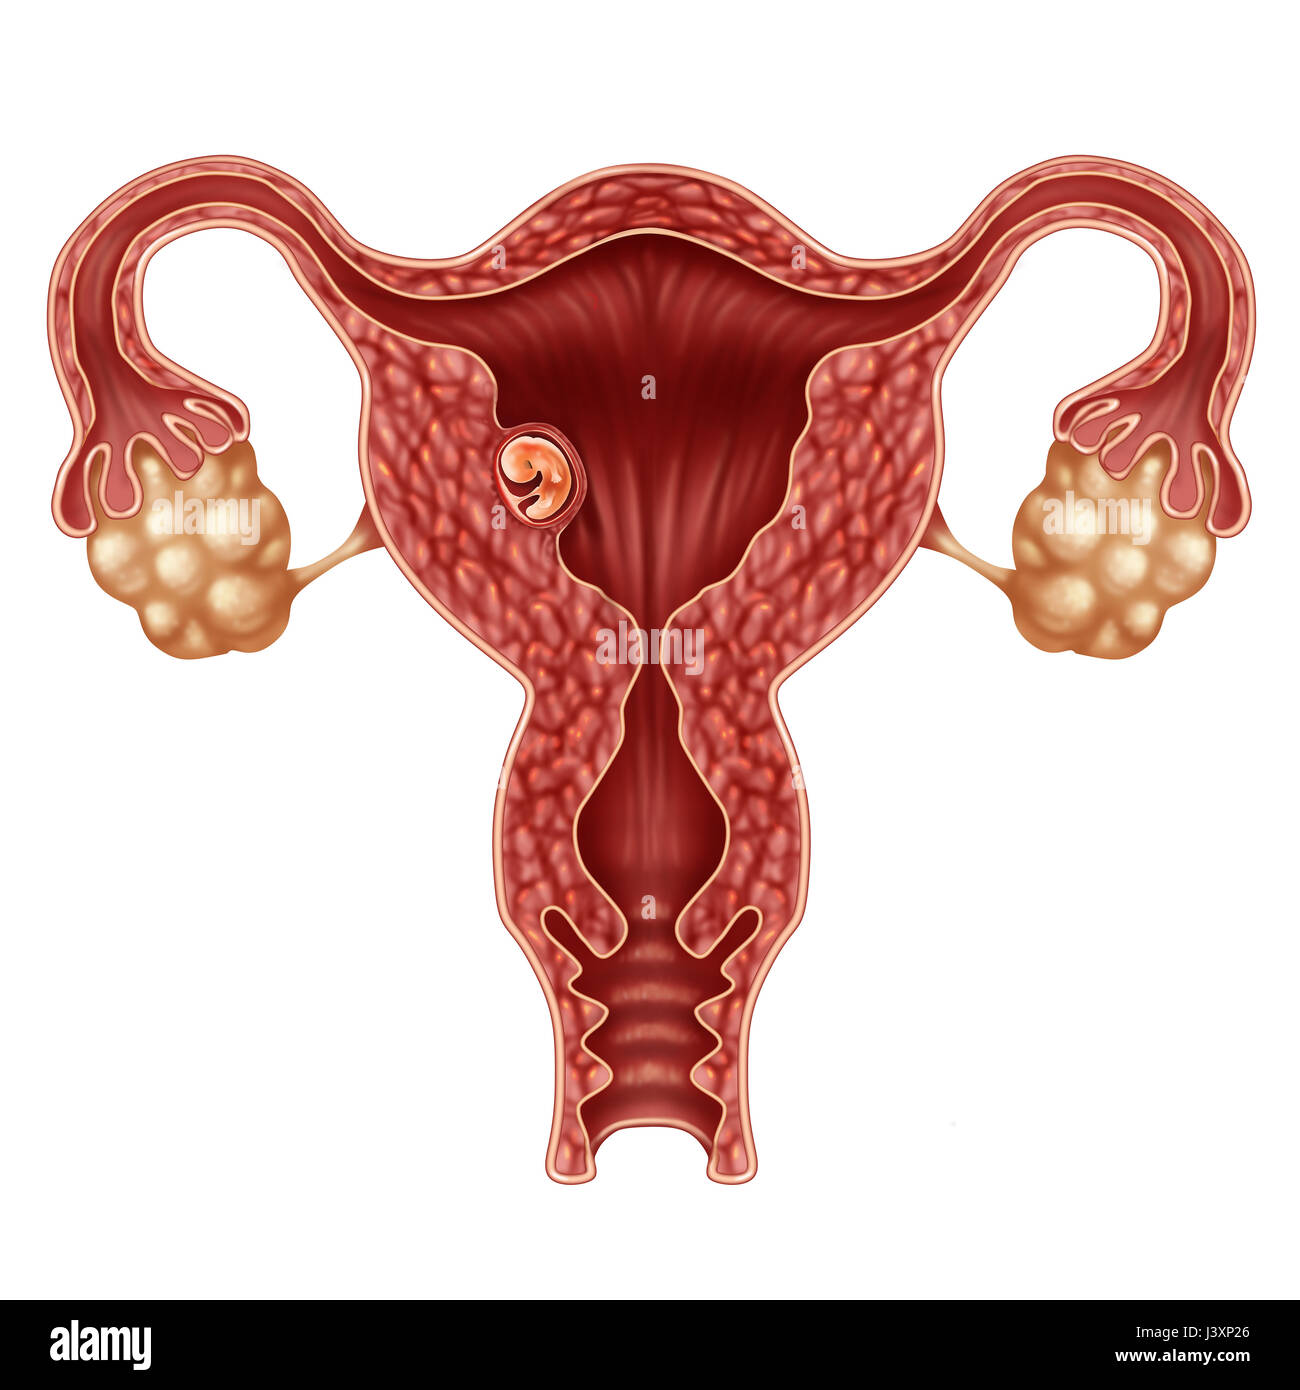 Implanted human embryo concept and successful pregnancy implantation in the uterus as a growing fetus in a female body as an obstetrics. Stock Photo